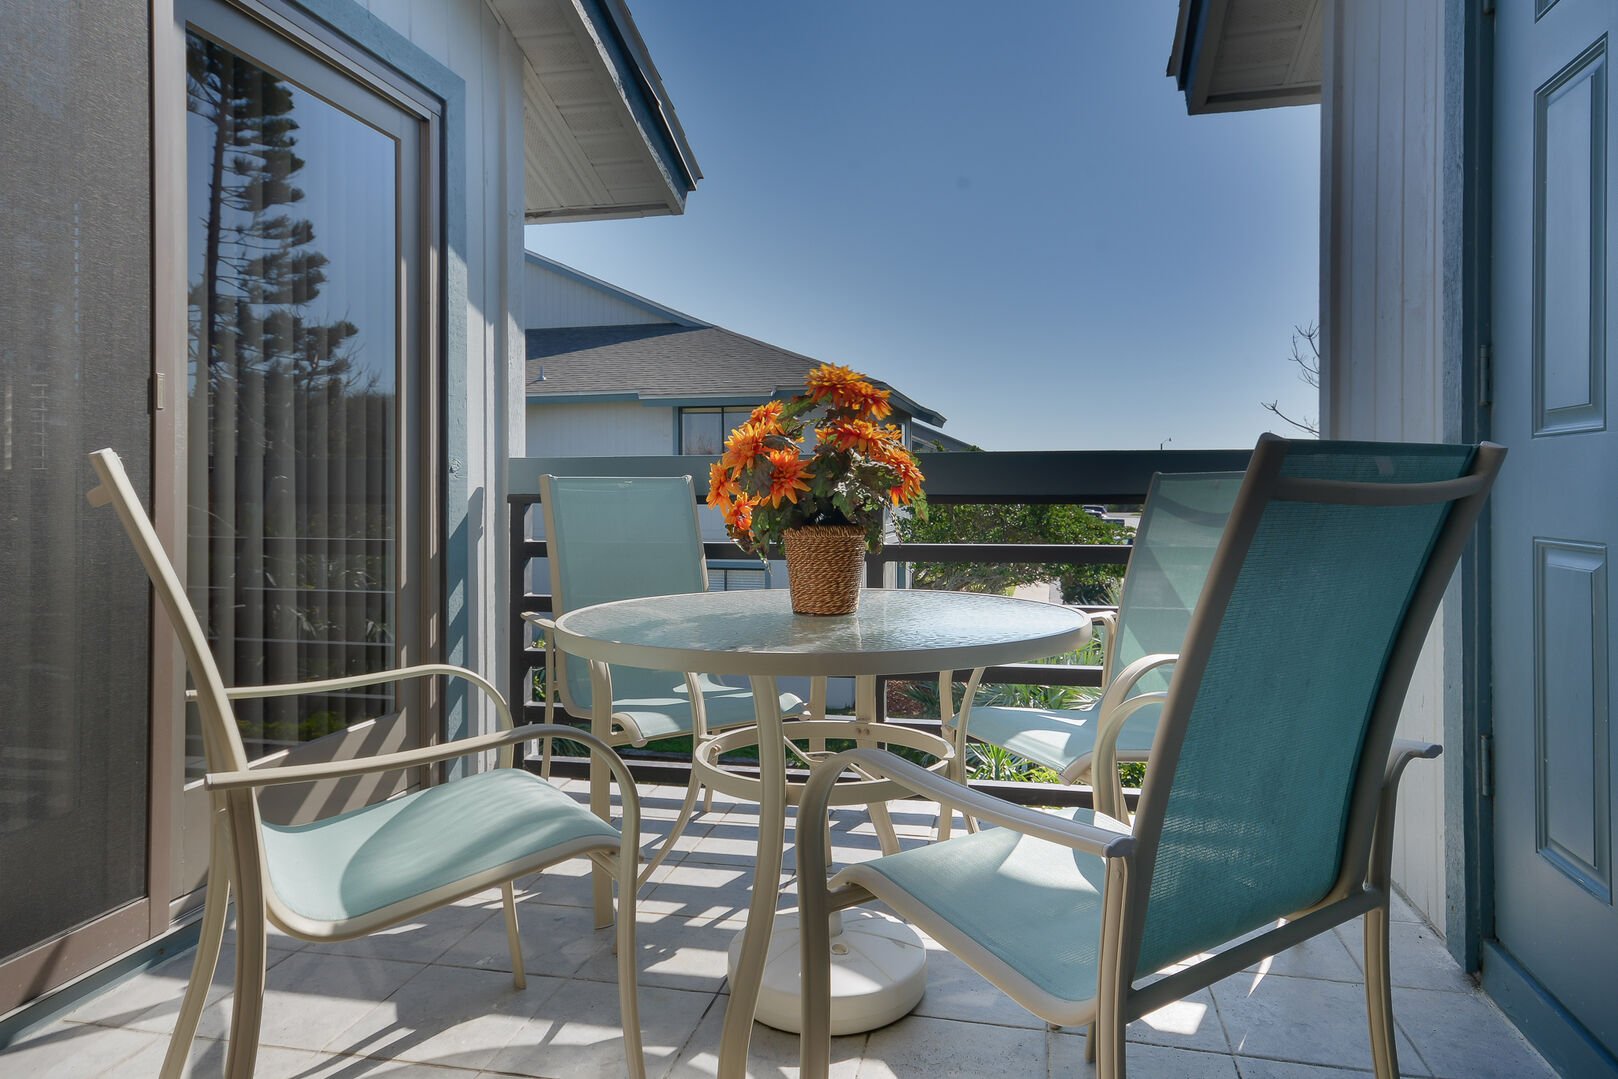 Enjoy the sunny weather from the private patio at this 3 bedroom condo new smyrna beach